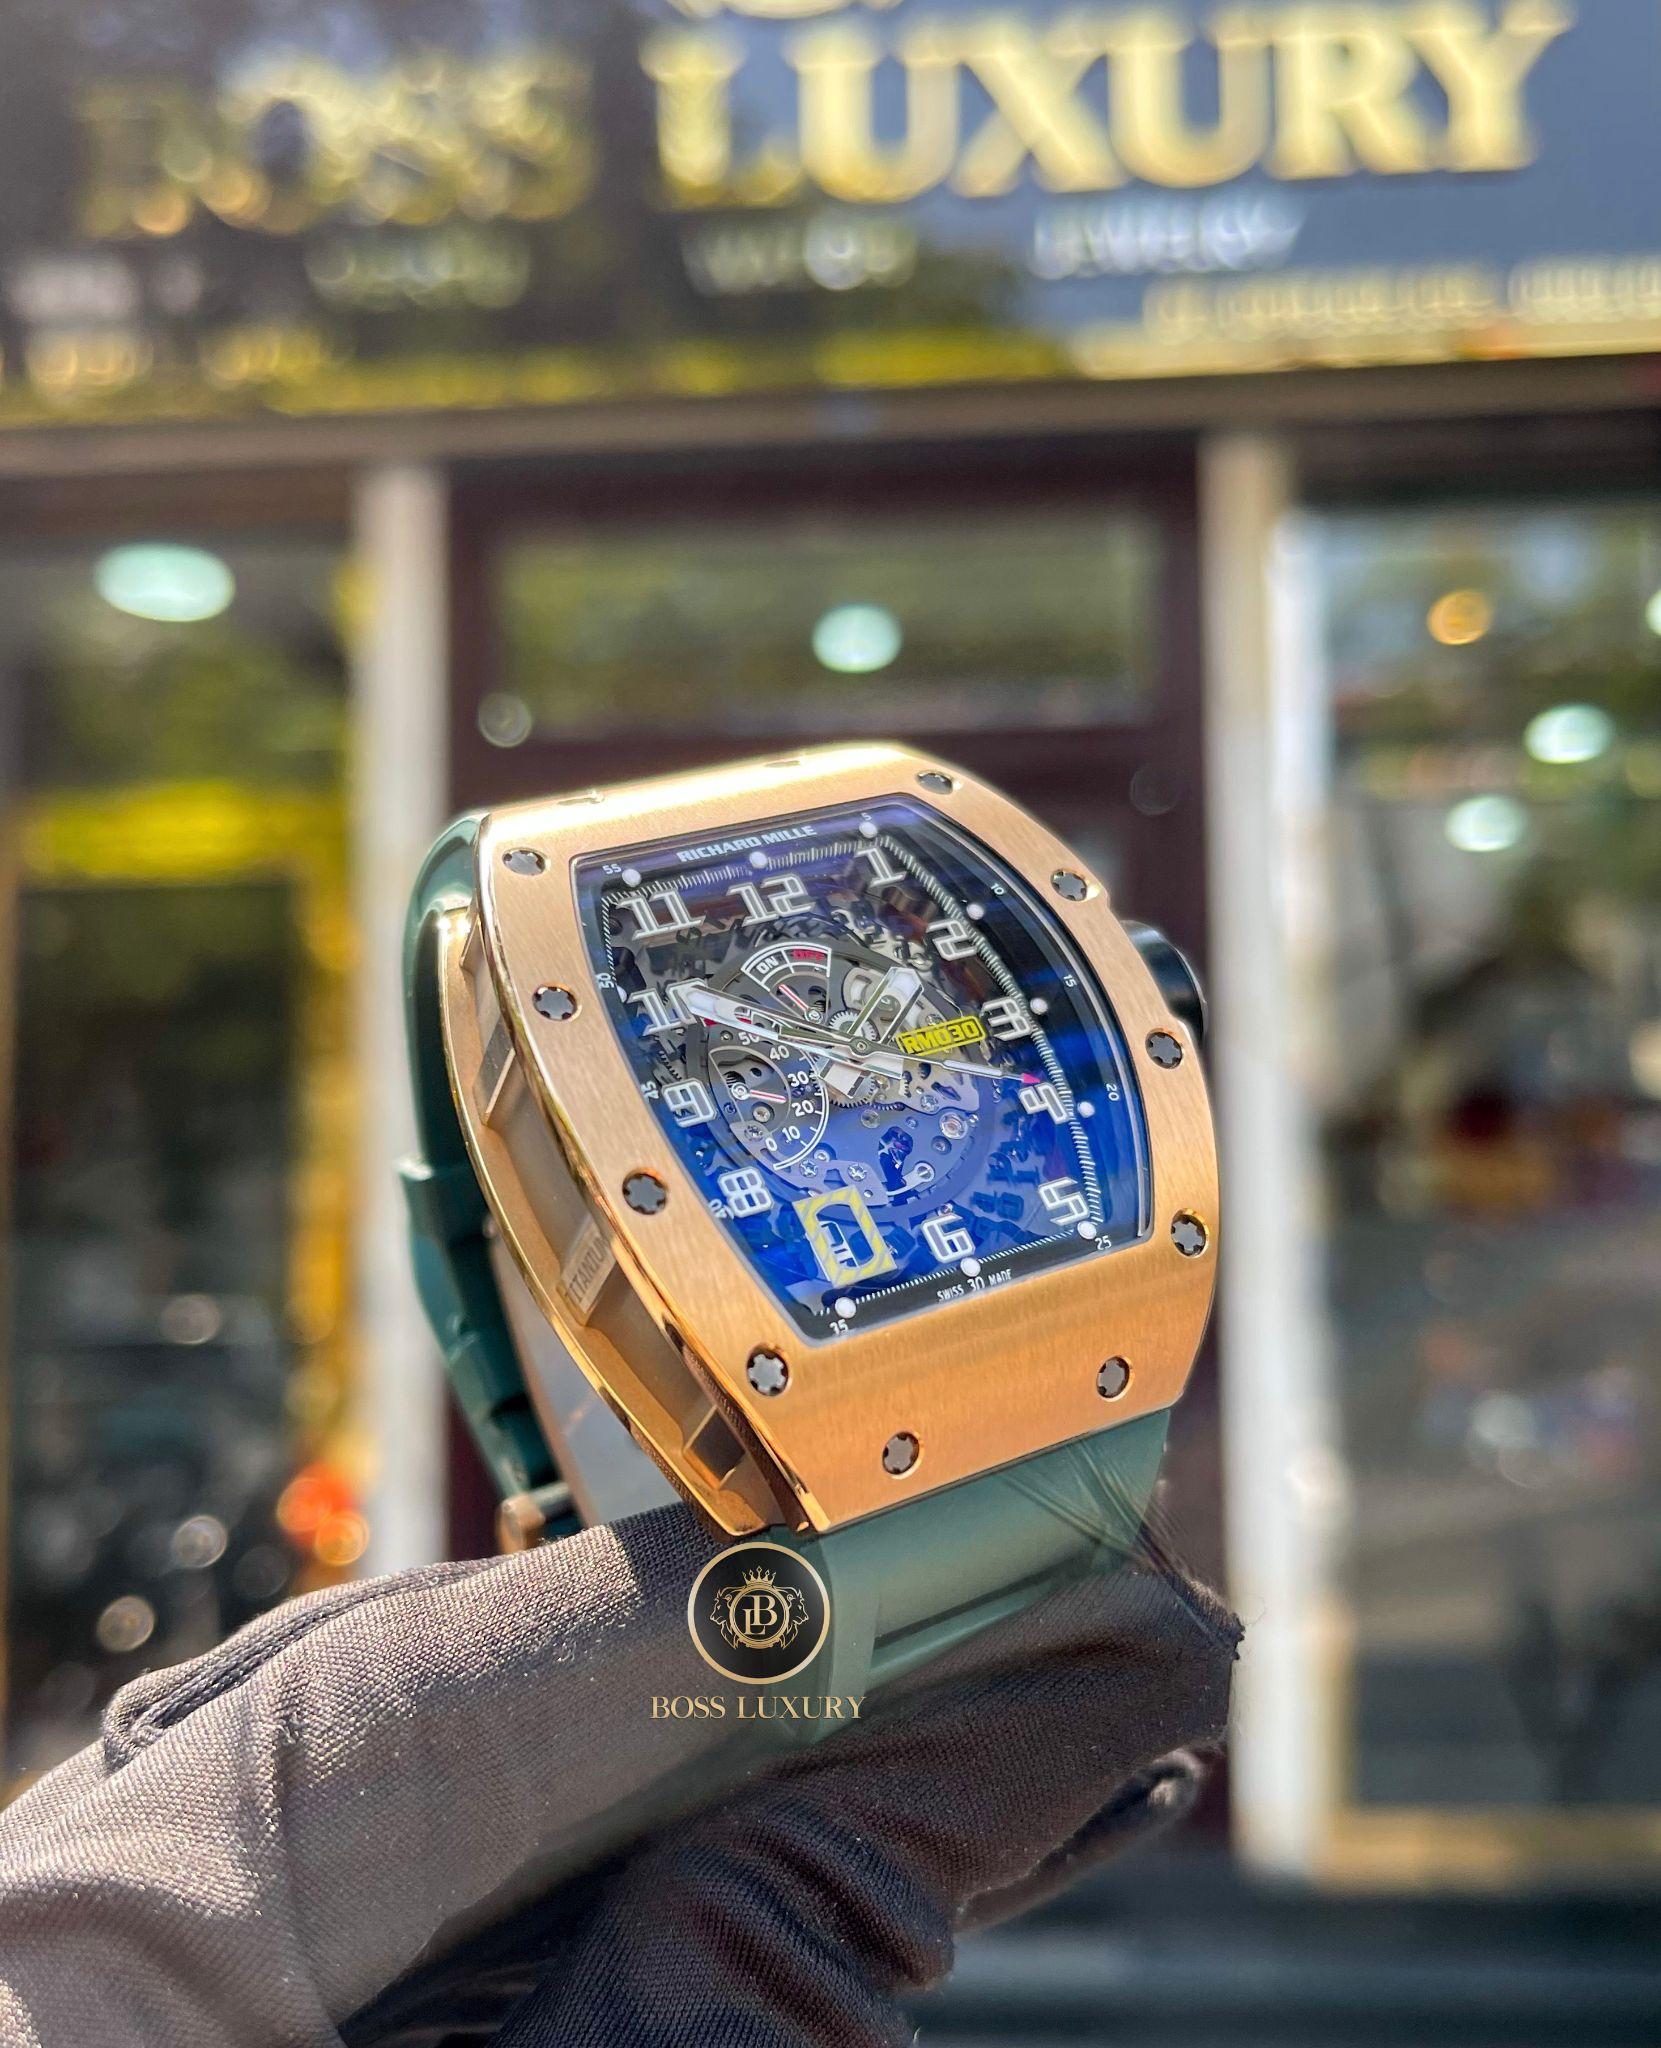 The most sought-after Richard Mille watches at Boss Luxury - Photo 2.